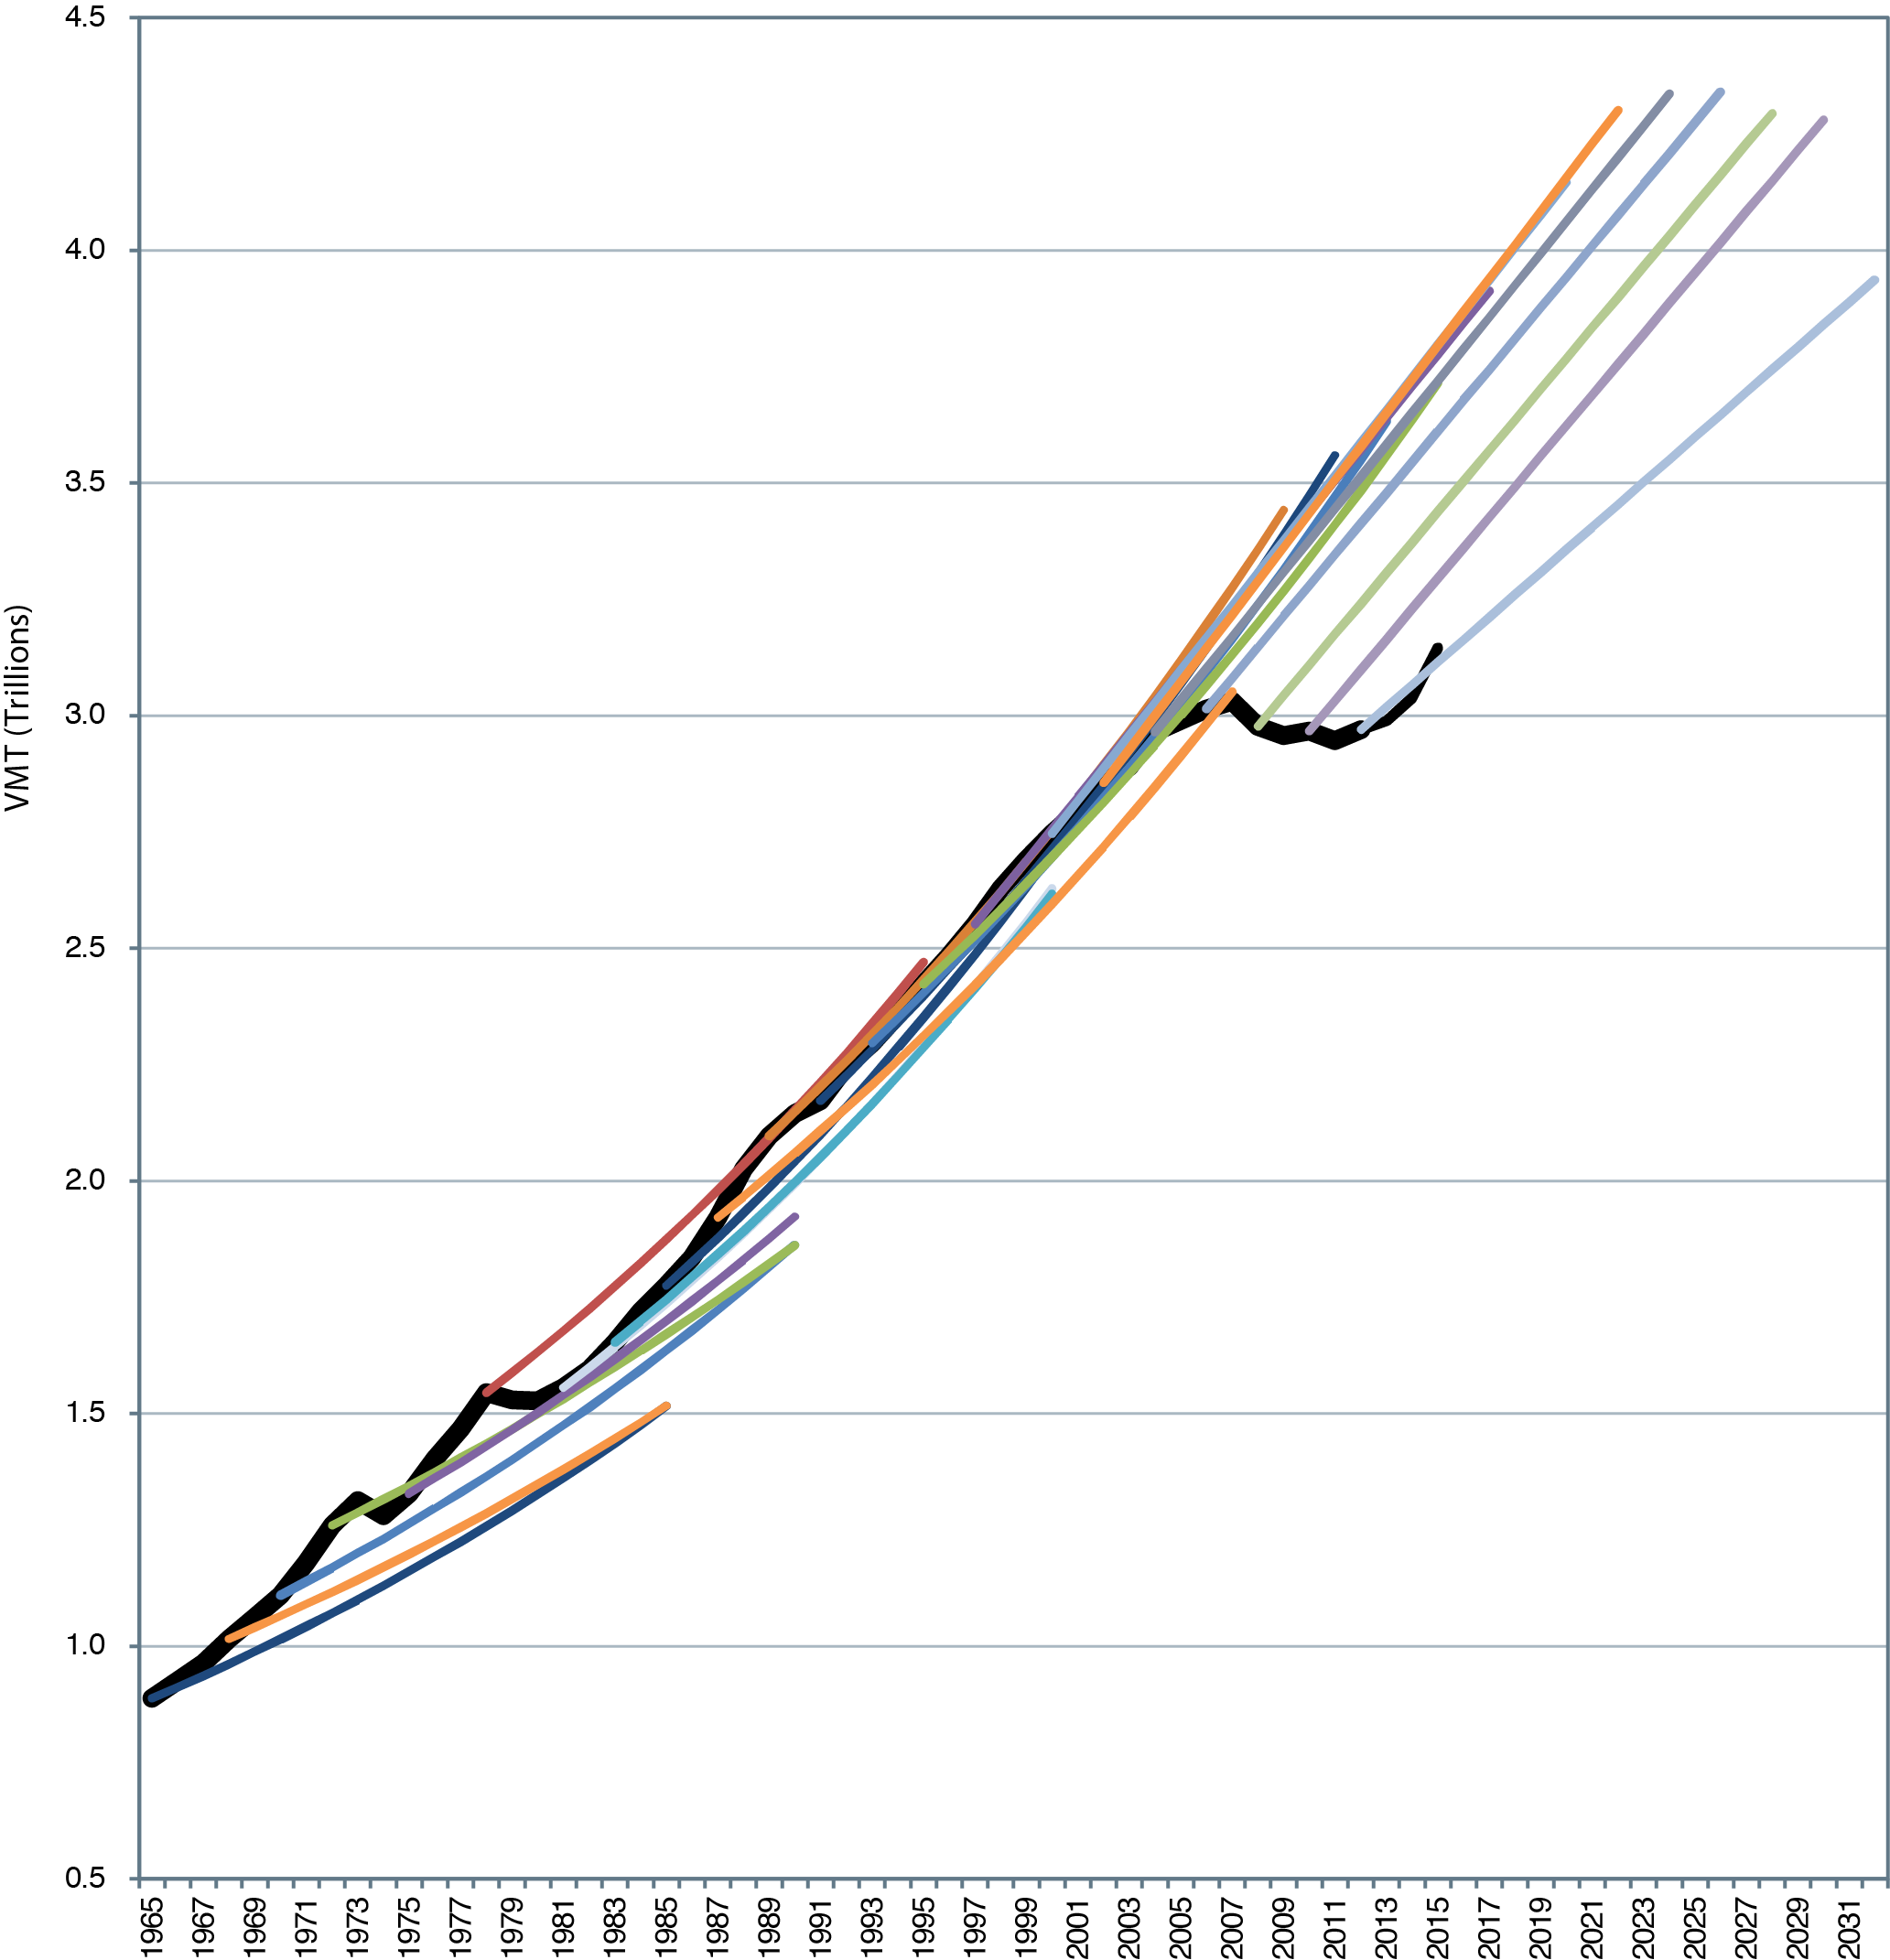 Line chart shows State-provided long-term VMT forecasts for years 1965 through 2032. A solid black line represents actual VMT through 2012; it starts at 0.89 trillion in 1965 VMT and ends at 2.97 trillion VMT in 2012. A dashed black line reflects preliminary estimates through 2015, which starts at 2.97 trillion VMT in 2012 and ends at 3.15 trillion VMT in 2015. Additional dashed colored lines represent State-provided long-term VMT forecasts utilized in C&P reports. Prior to 2002, C&P report forecasts were generally at or below the actual VMT line (solid black), after which C&P report forecasts were generally at or above the actual VMT line and the estimated VMT line (dashed black).  Source: C&P Report, various years.